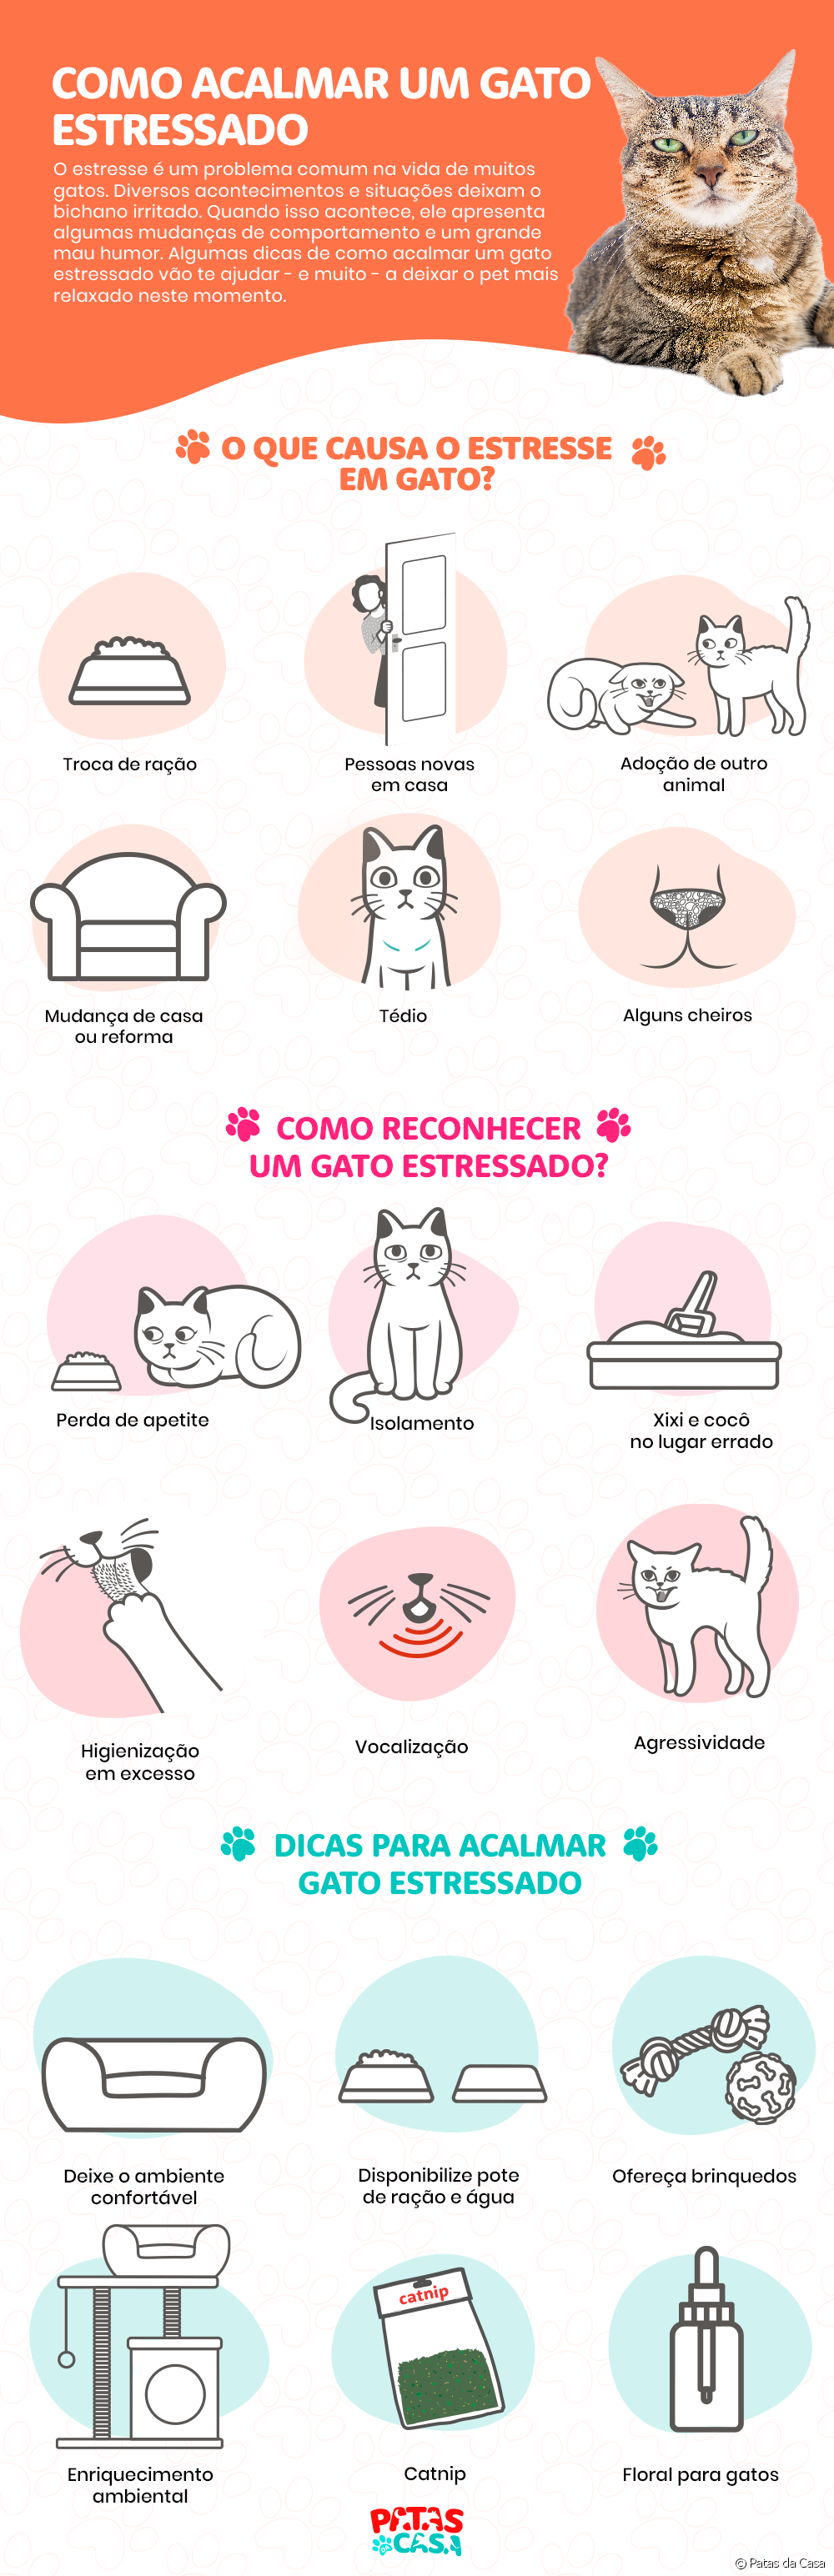  Stressed cat: see how to calm the kitty in infographic